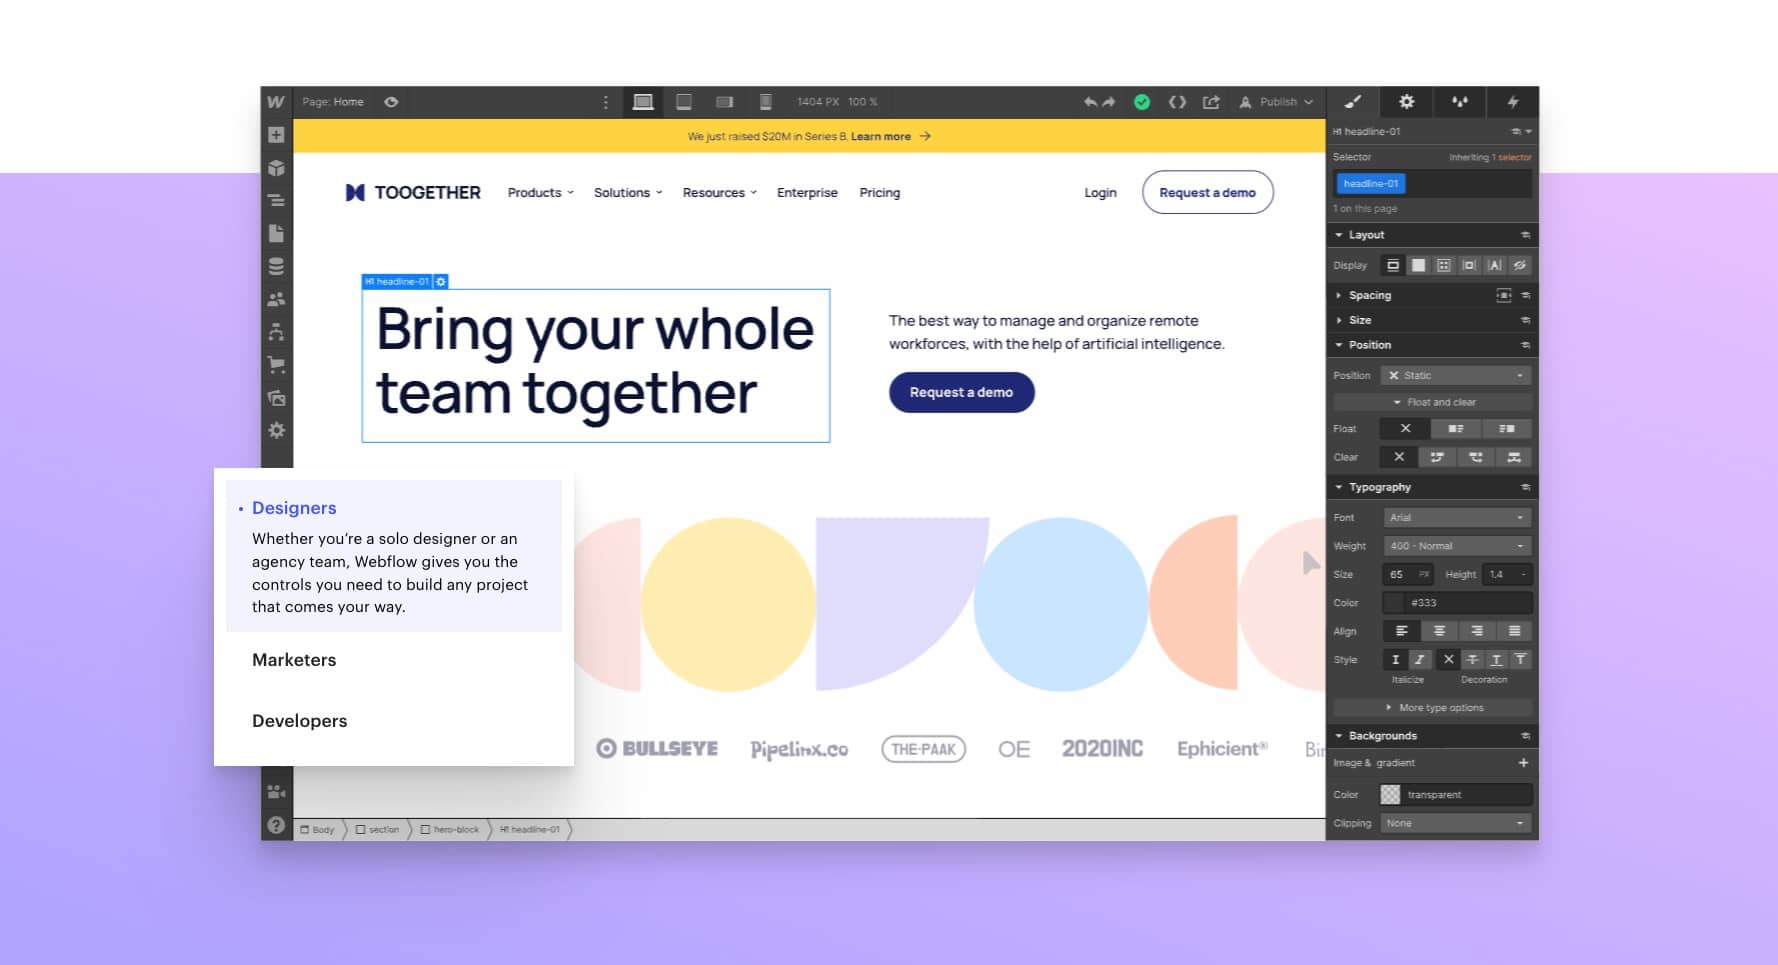 Webflow has great features for designers, developers, and marketers.